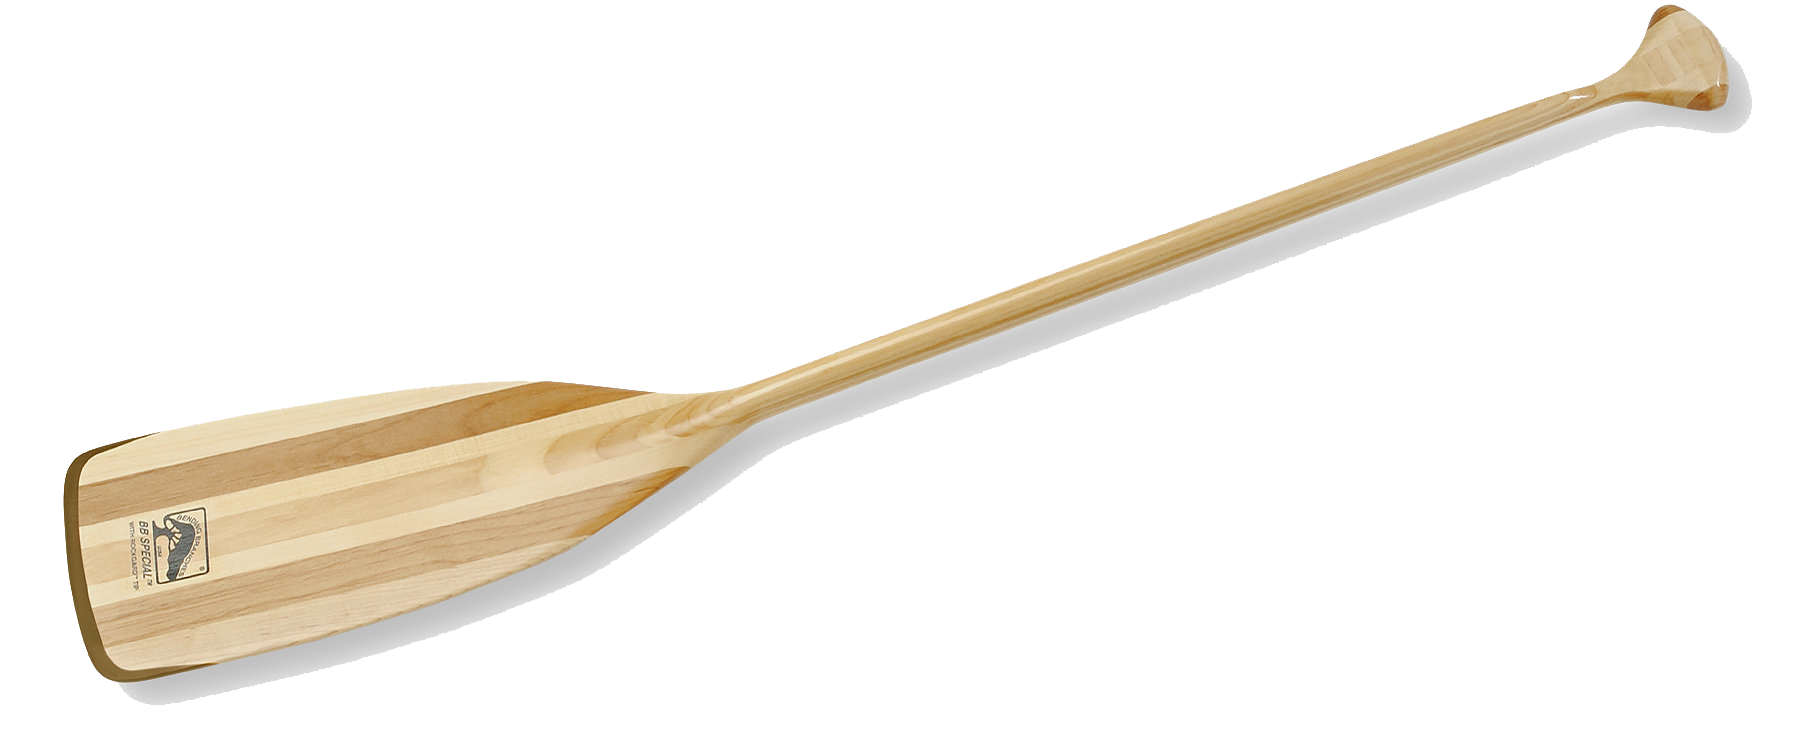 Paddle Photos PNG Image